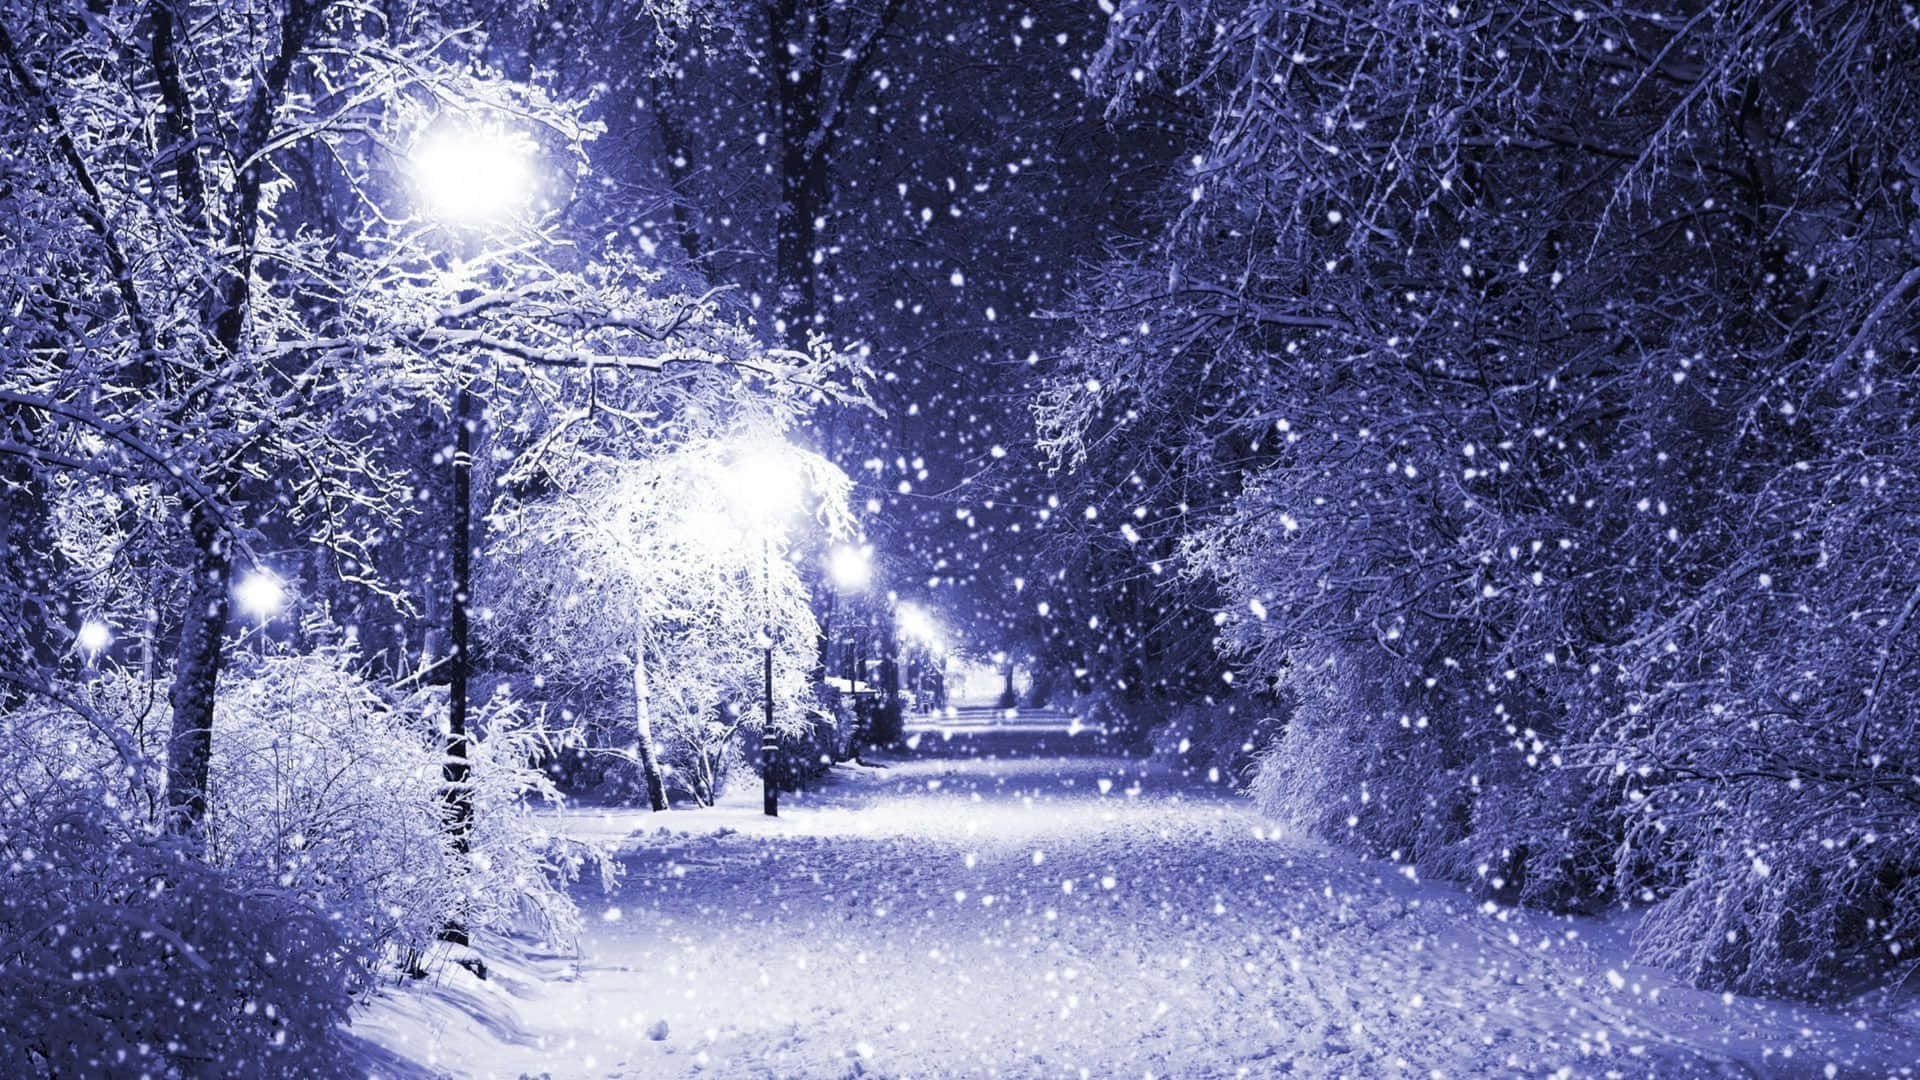 illuminated Pathway Covered In Snow 4K Wallpaper